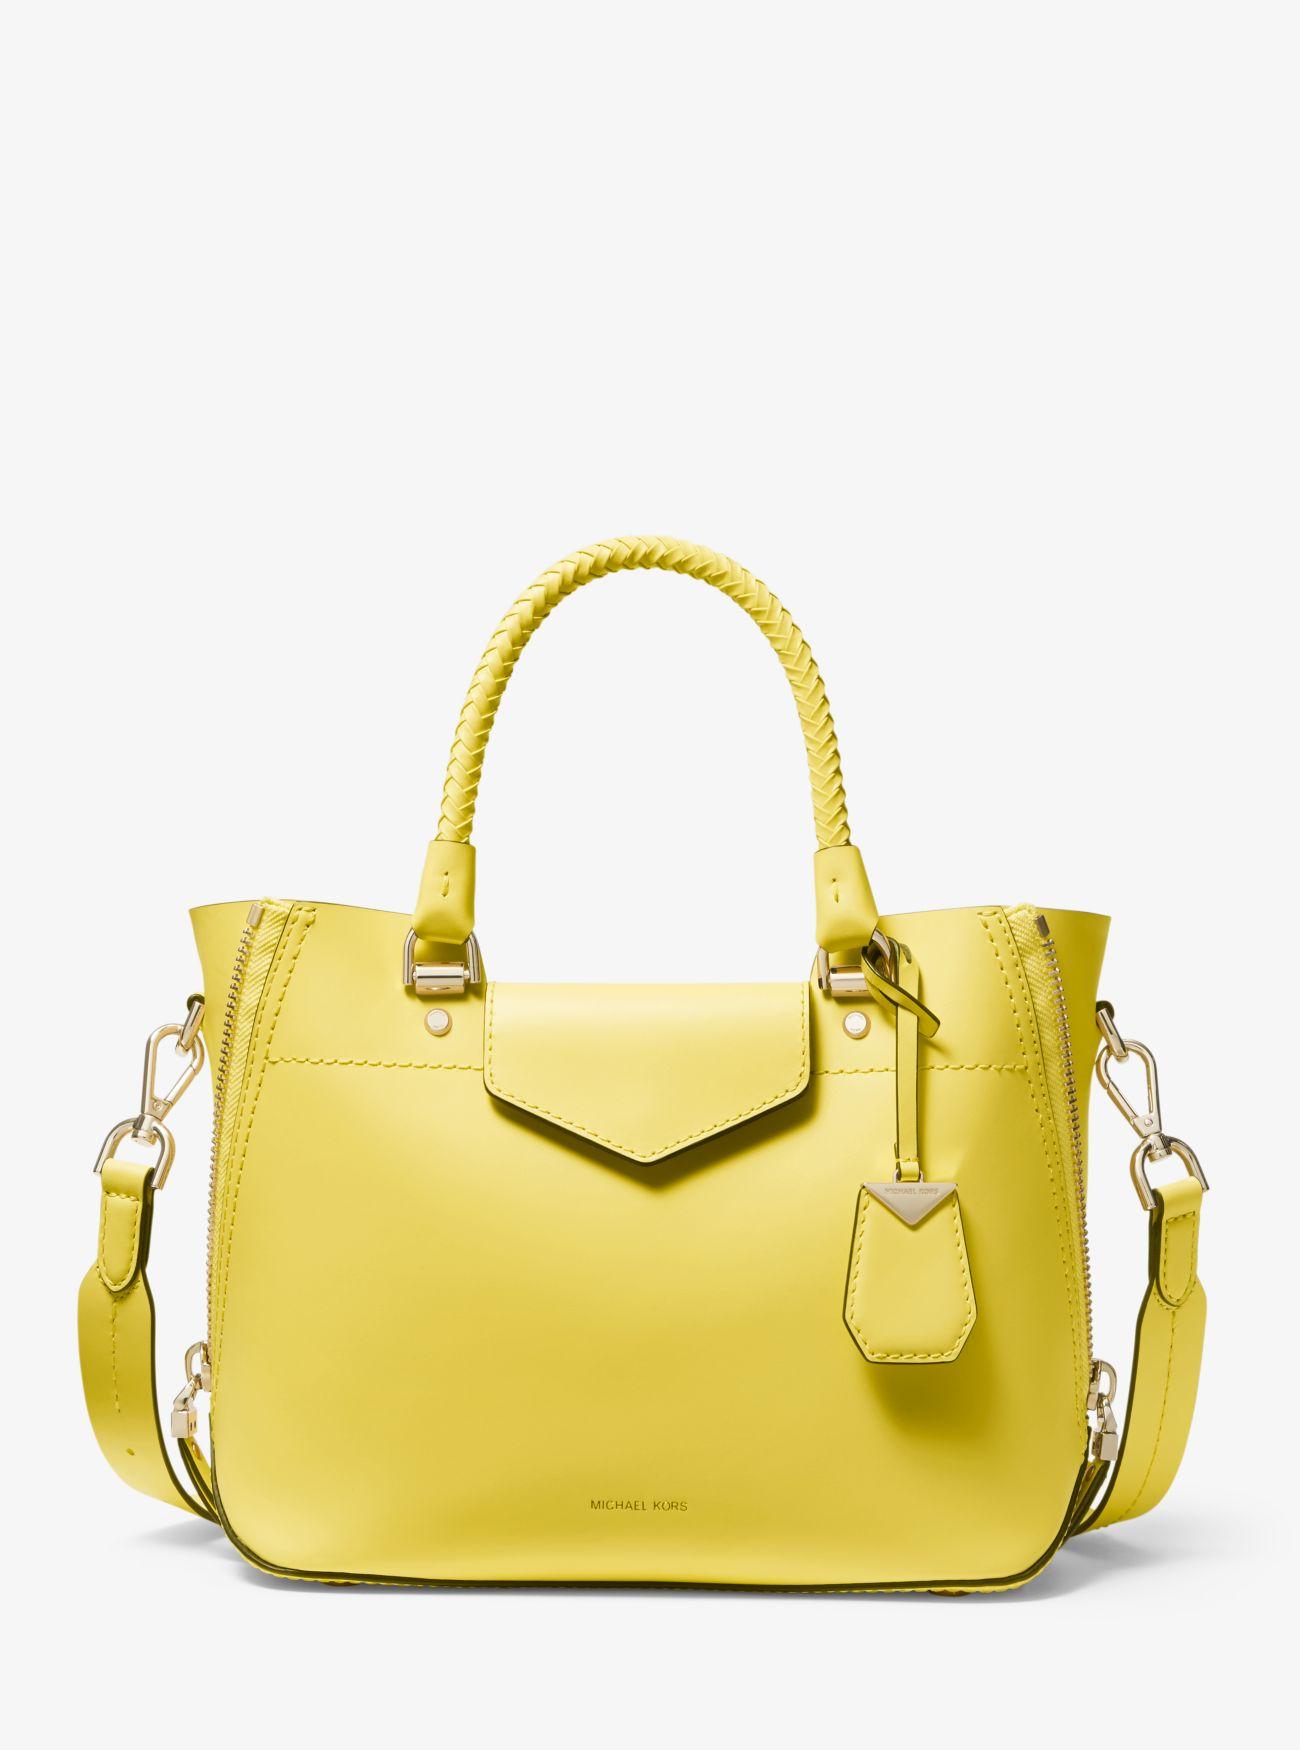 Michael Kors Blakely Leather Satchel in Yellow - Lyst